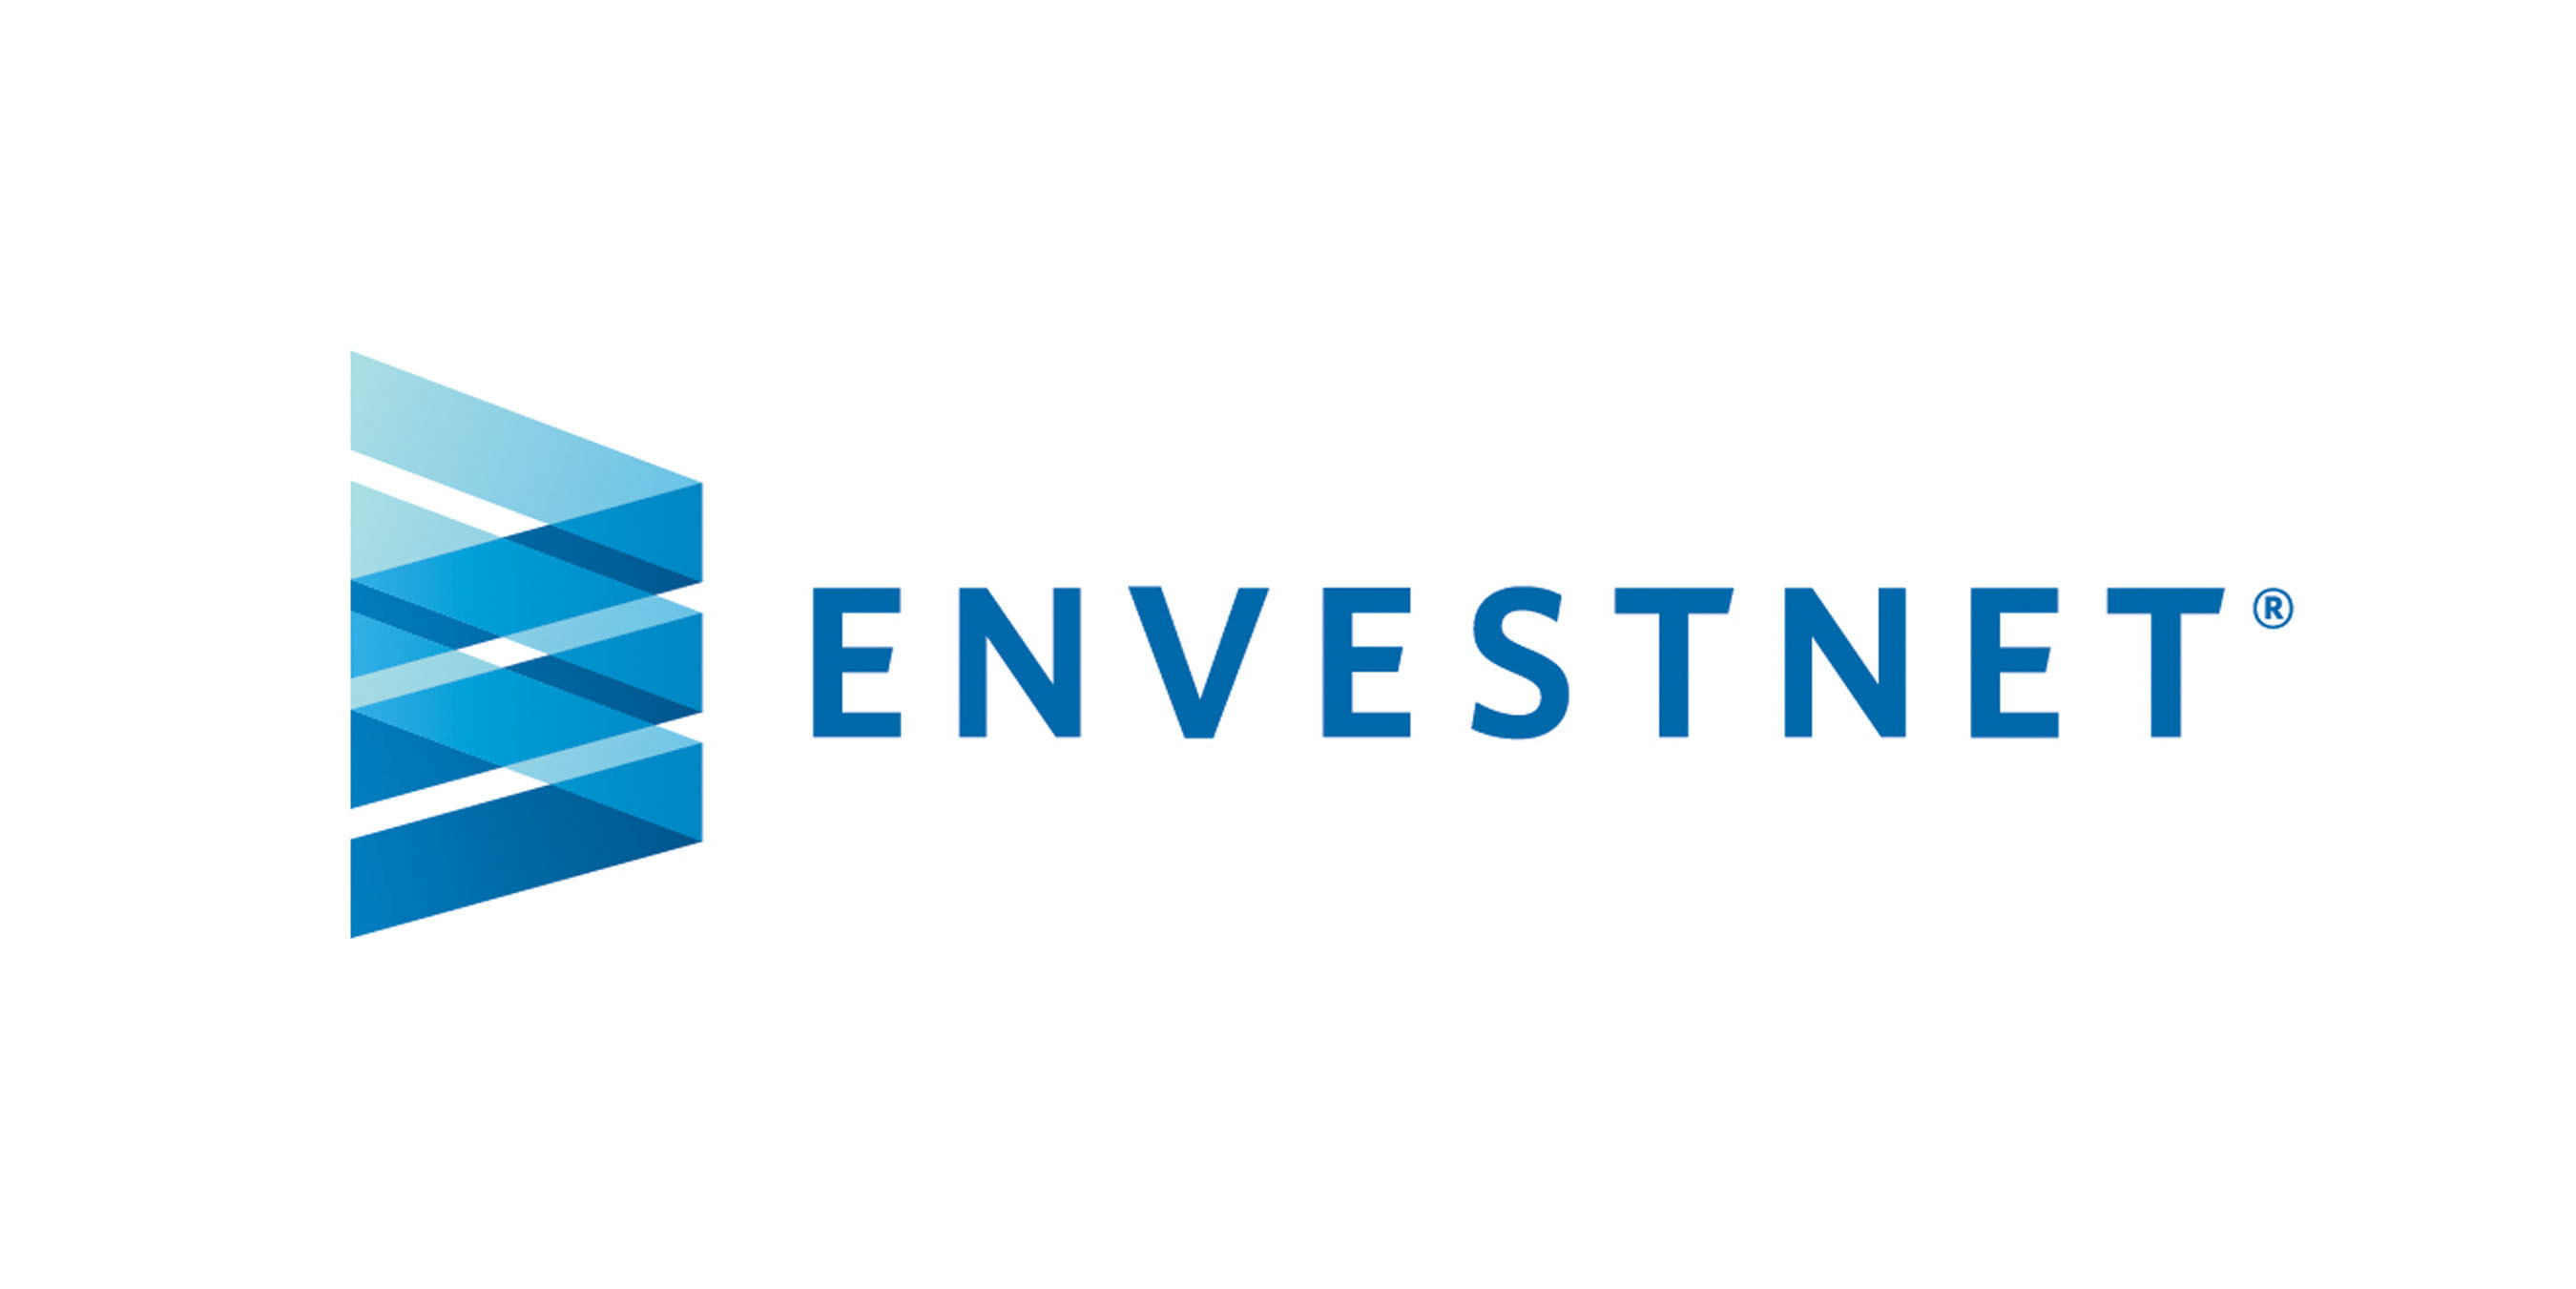 Envestnet, Inc. (NYSE: ENV) is a leading provider of unified wealth management technology and services to investment advisors. Our open-architecture platforms unify and fortify the wealth management process, delivering unparalleled flexibility, accuracy, performance and value. Envestnet solutions enable the transformation of wealth management into a transparent, independent, objective and fully-aligned standard of care, and empower advisors to deliver better outcomes.